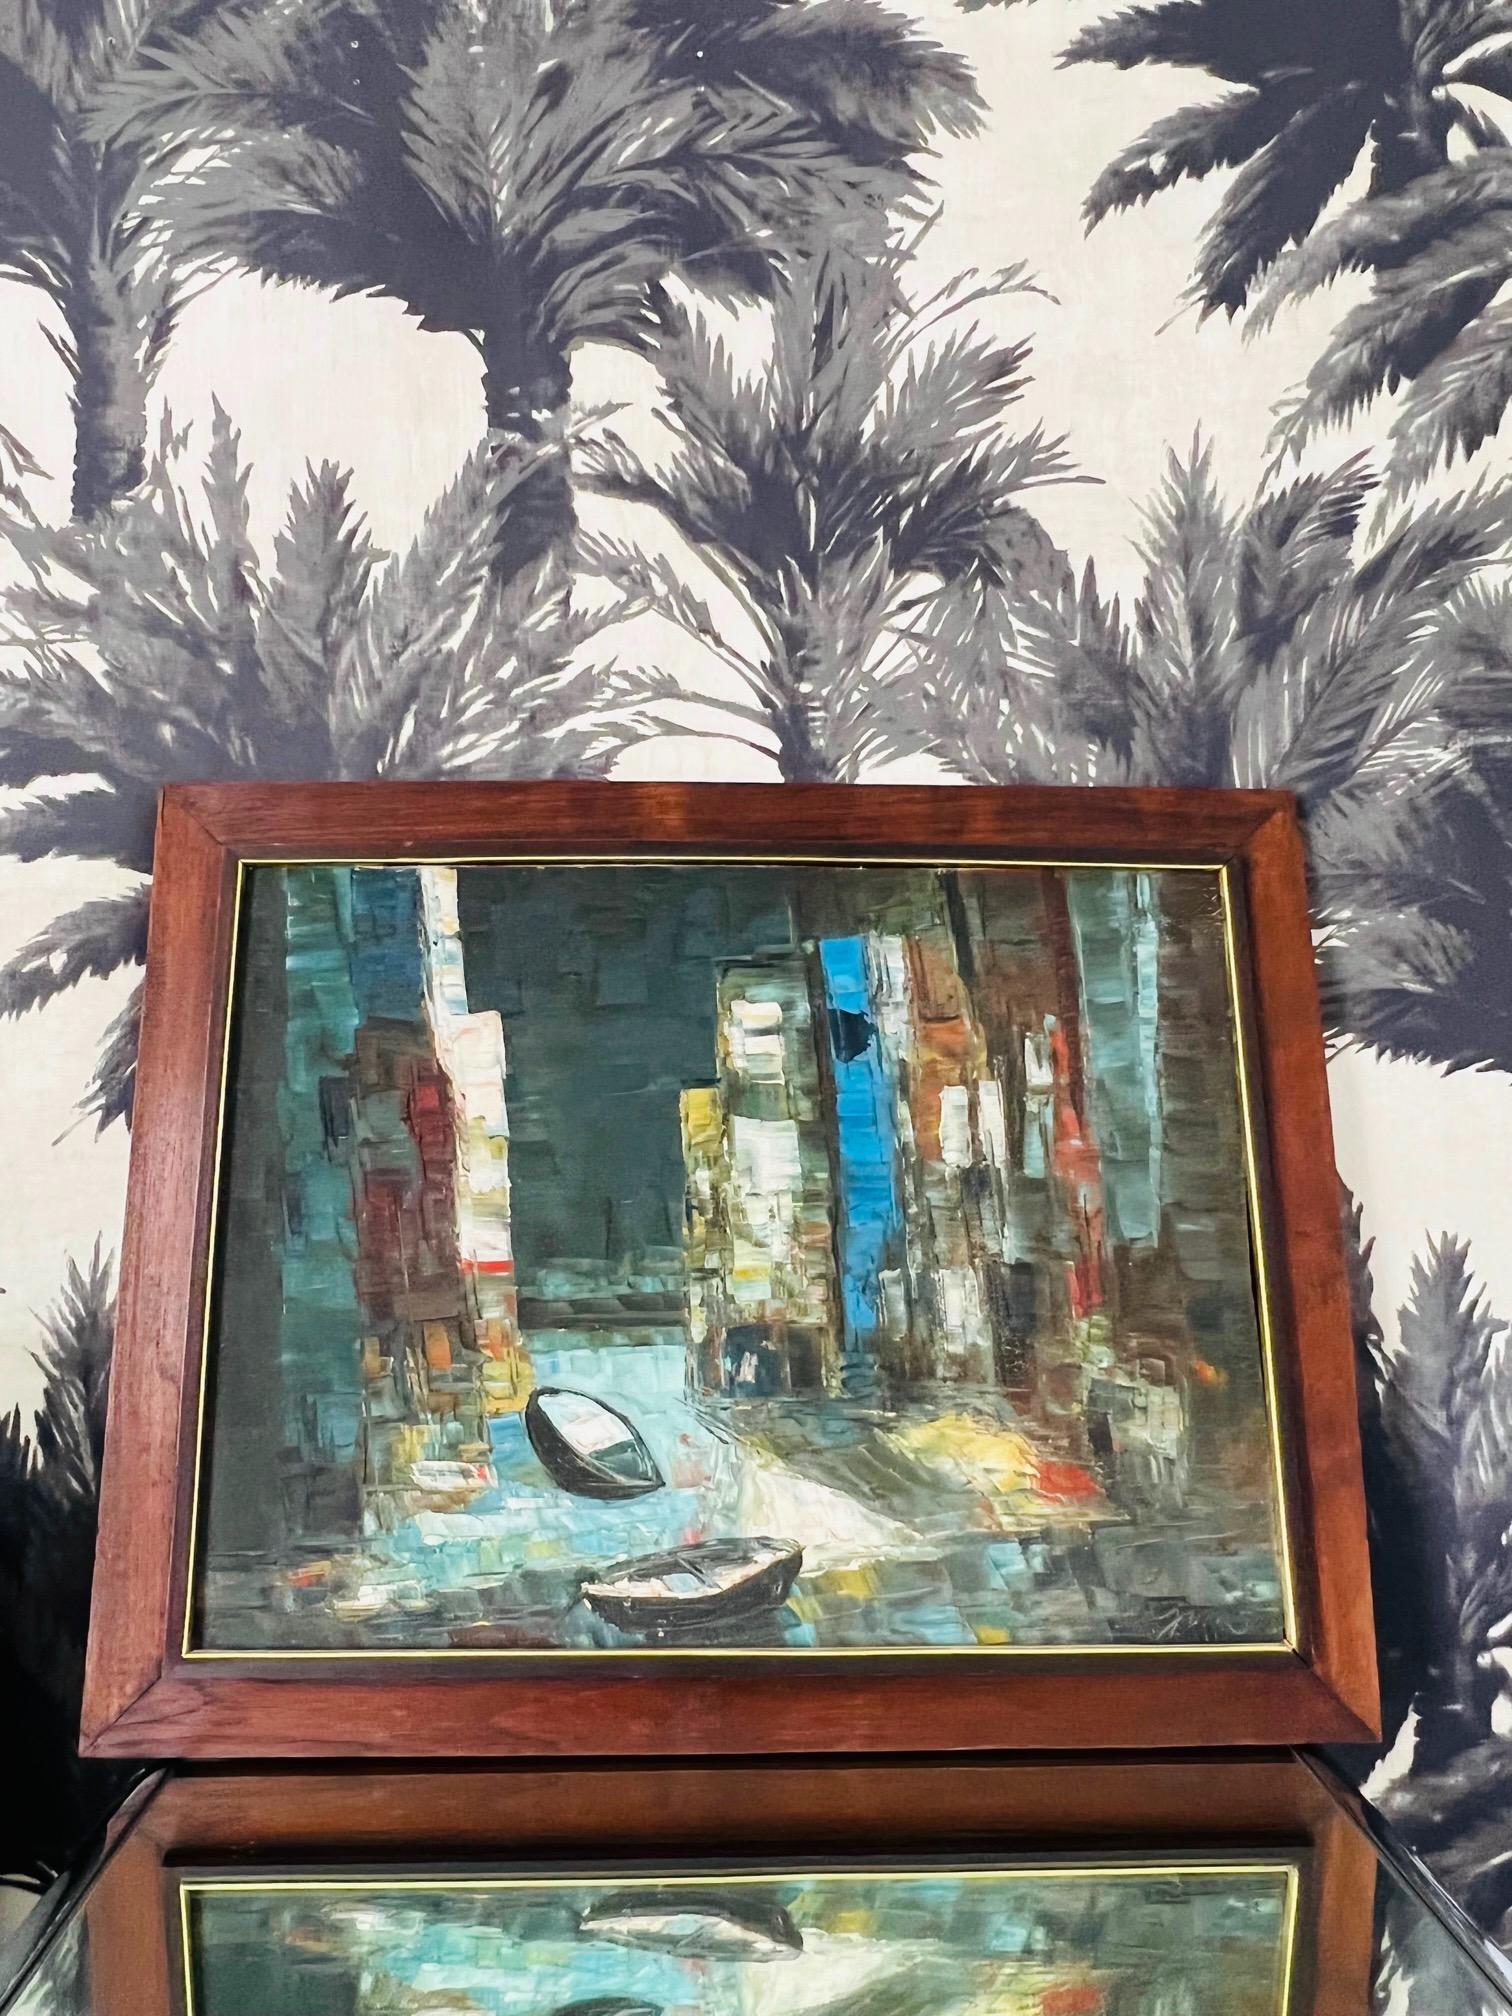 Hand-Crafted Abstract Painting in Original Wood Frame, Rowboats Oil on Board, c. 1950s For Sale